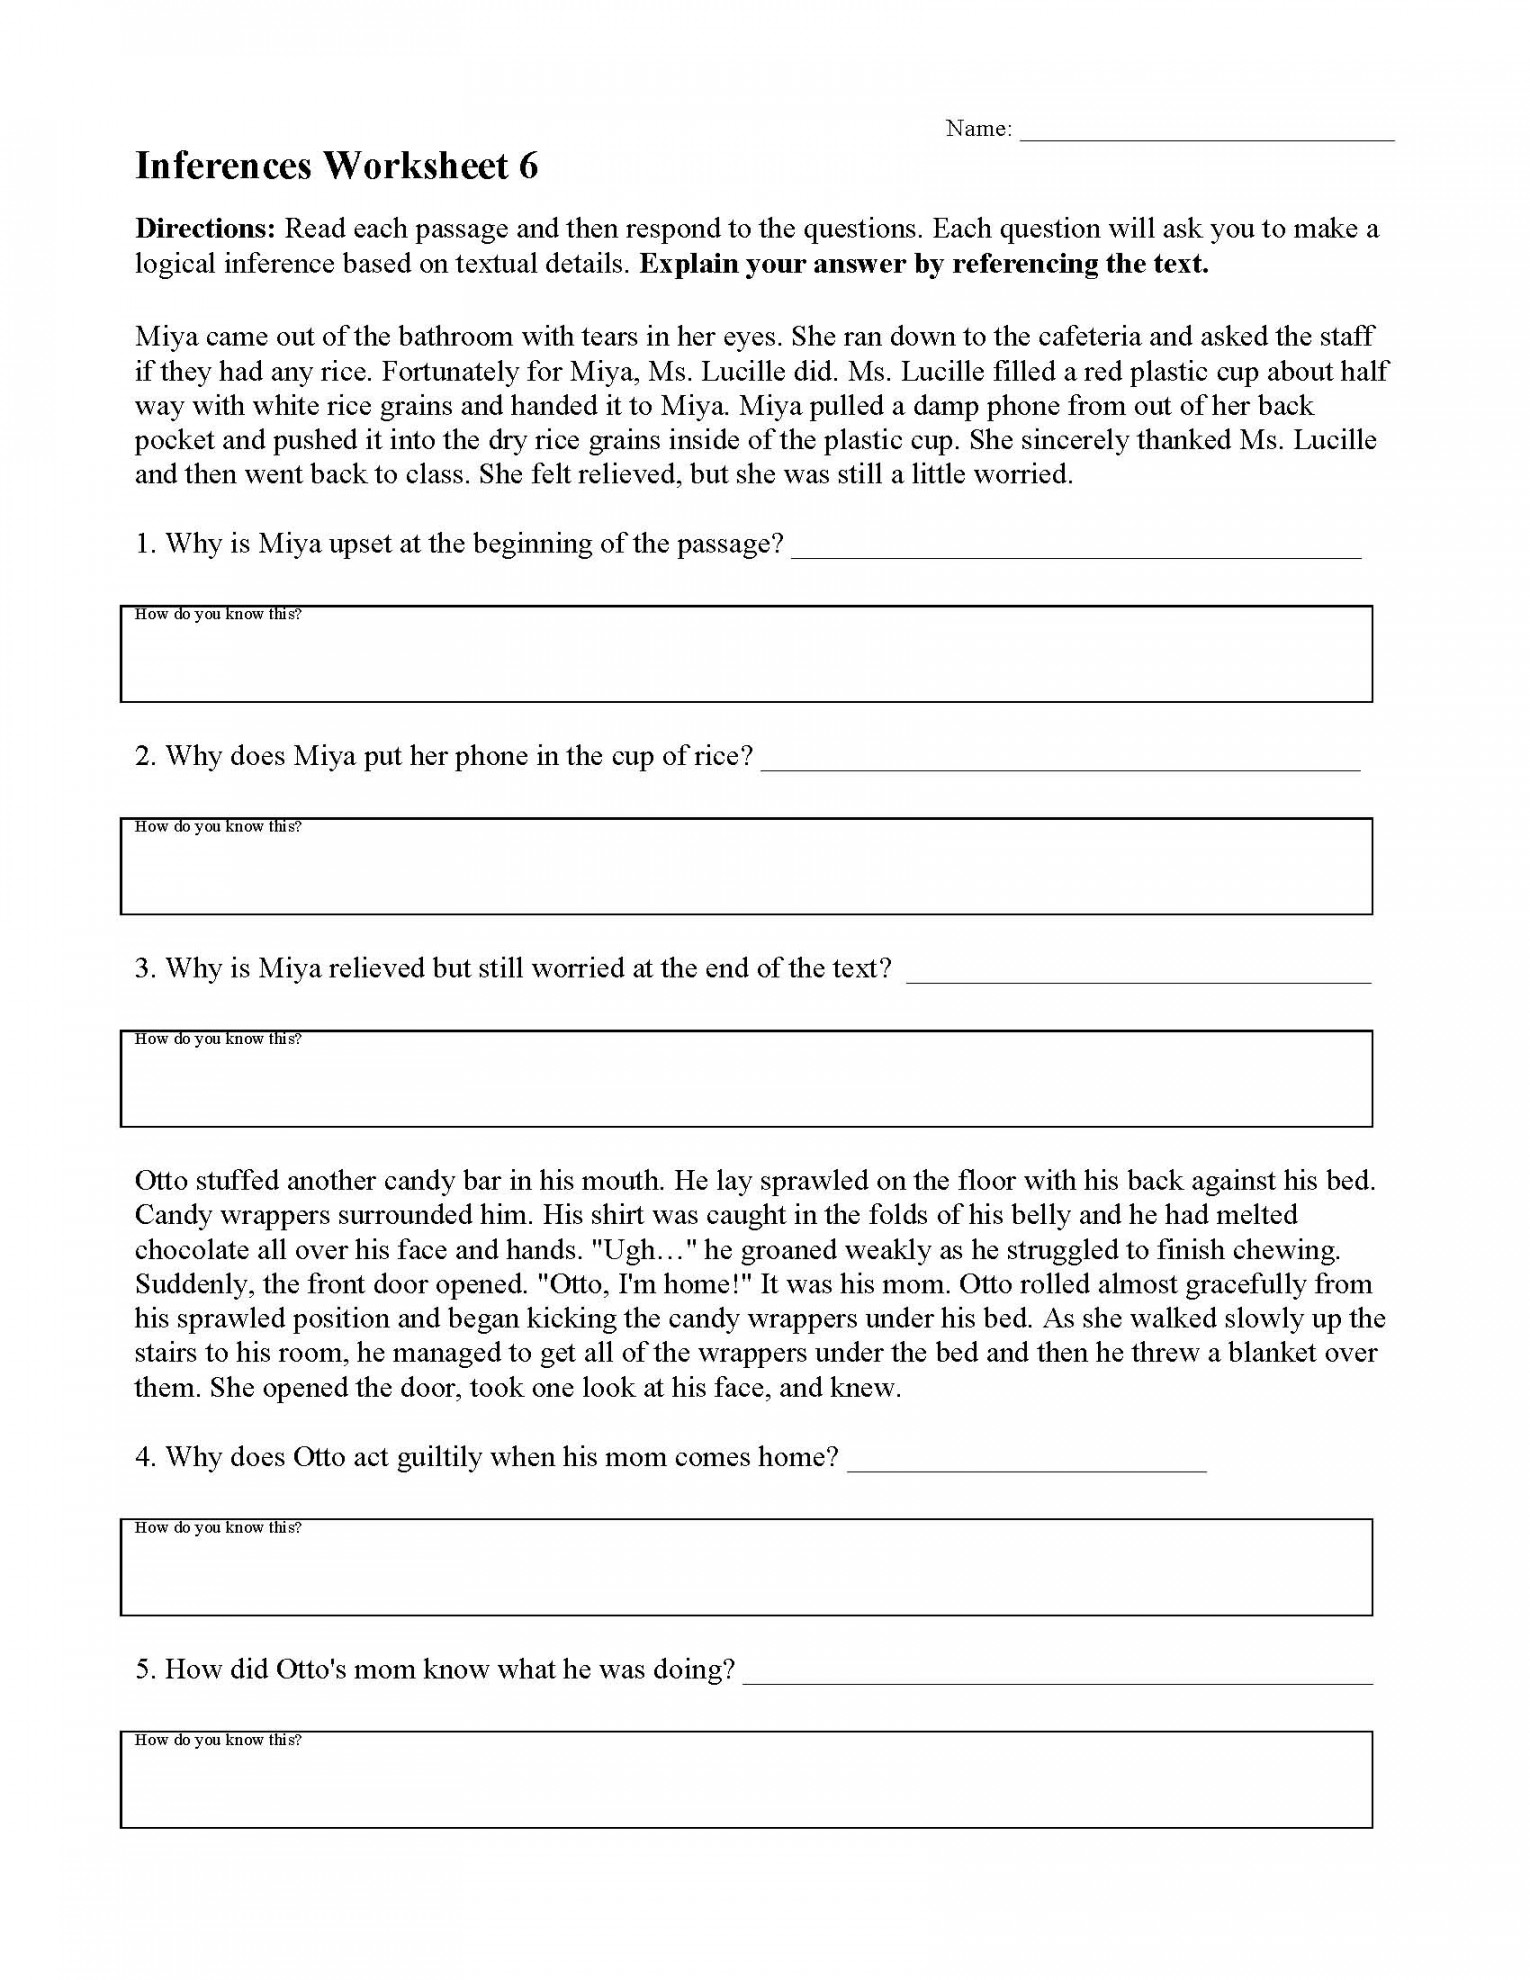 Inferences Worksheet   Reading Activity